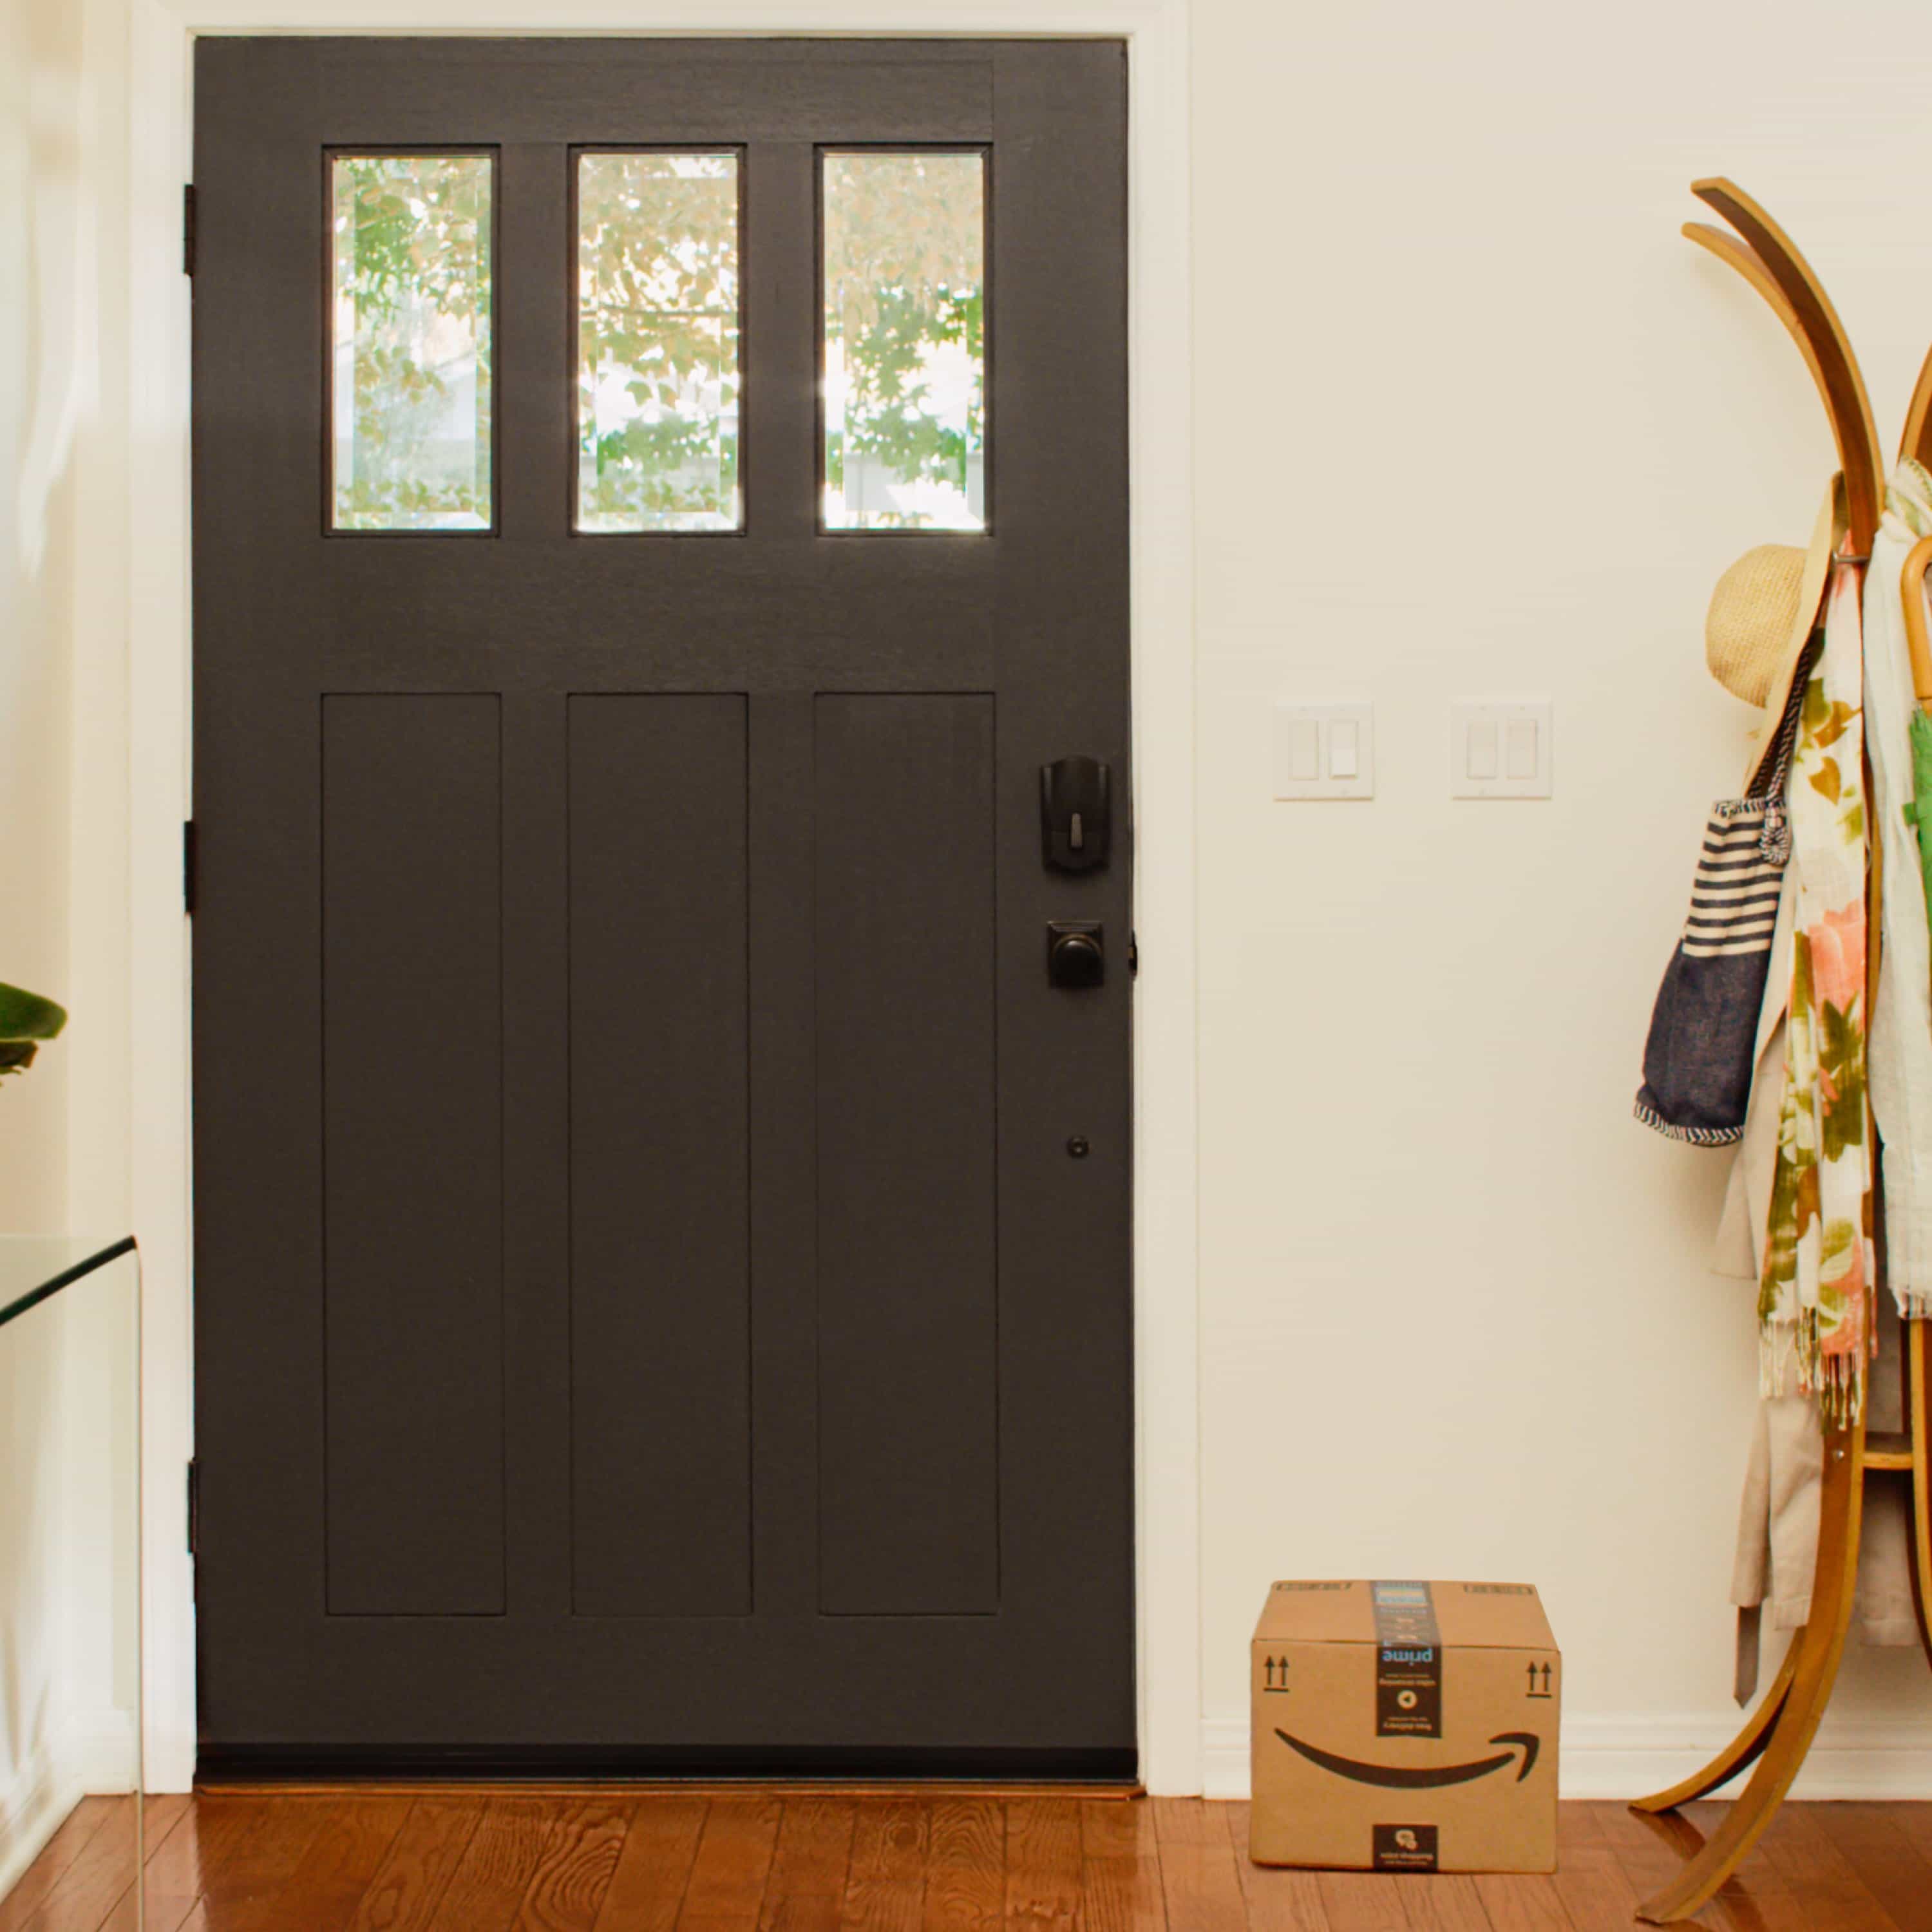 Schlage Encode Smart WiFi Deadbolt with Camelot Trim (for Works with Ring Video Doorbells and Cameras) - In the entryway of a home, a front door is equipped with a Schlage Encode Smart WiFi Deadbolt with Camelot Trim. An Amazon package is on the floor.